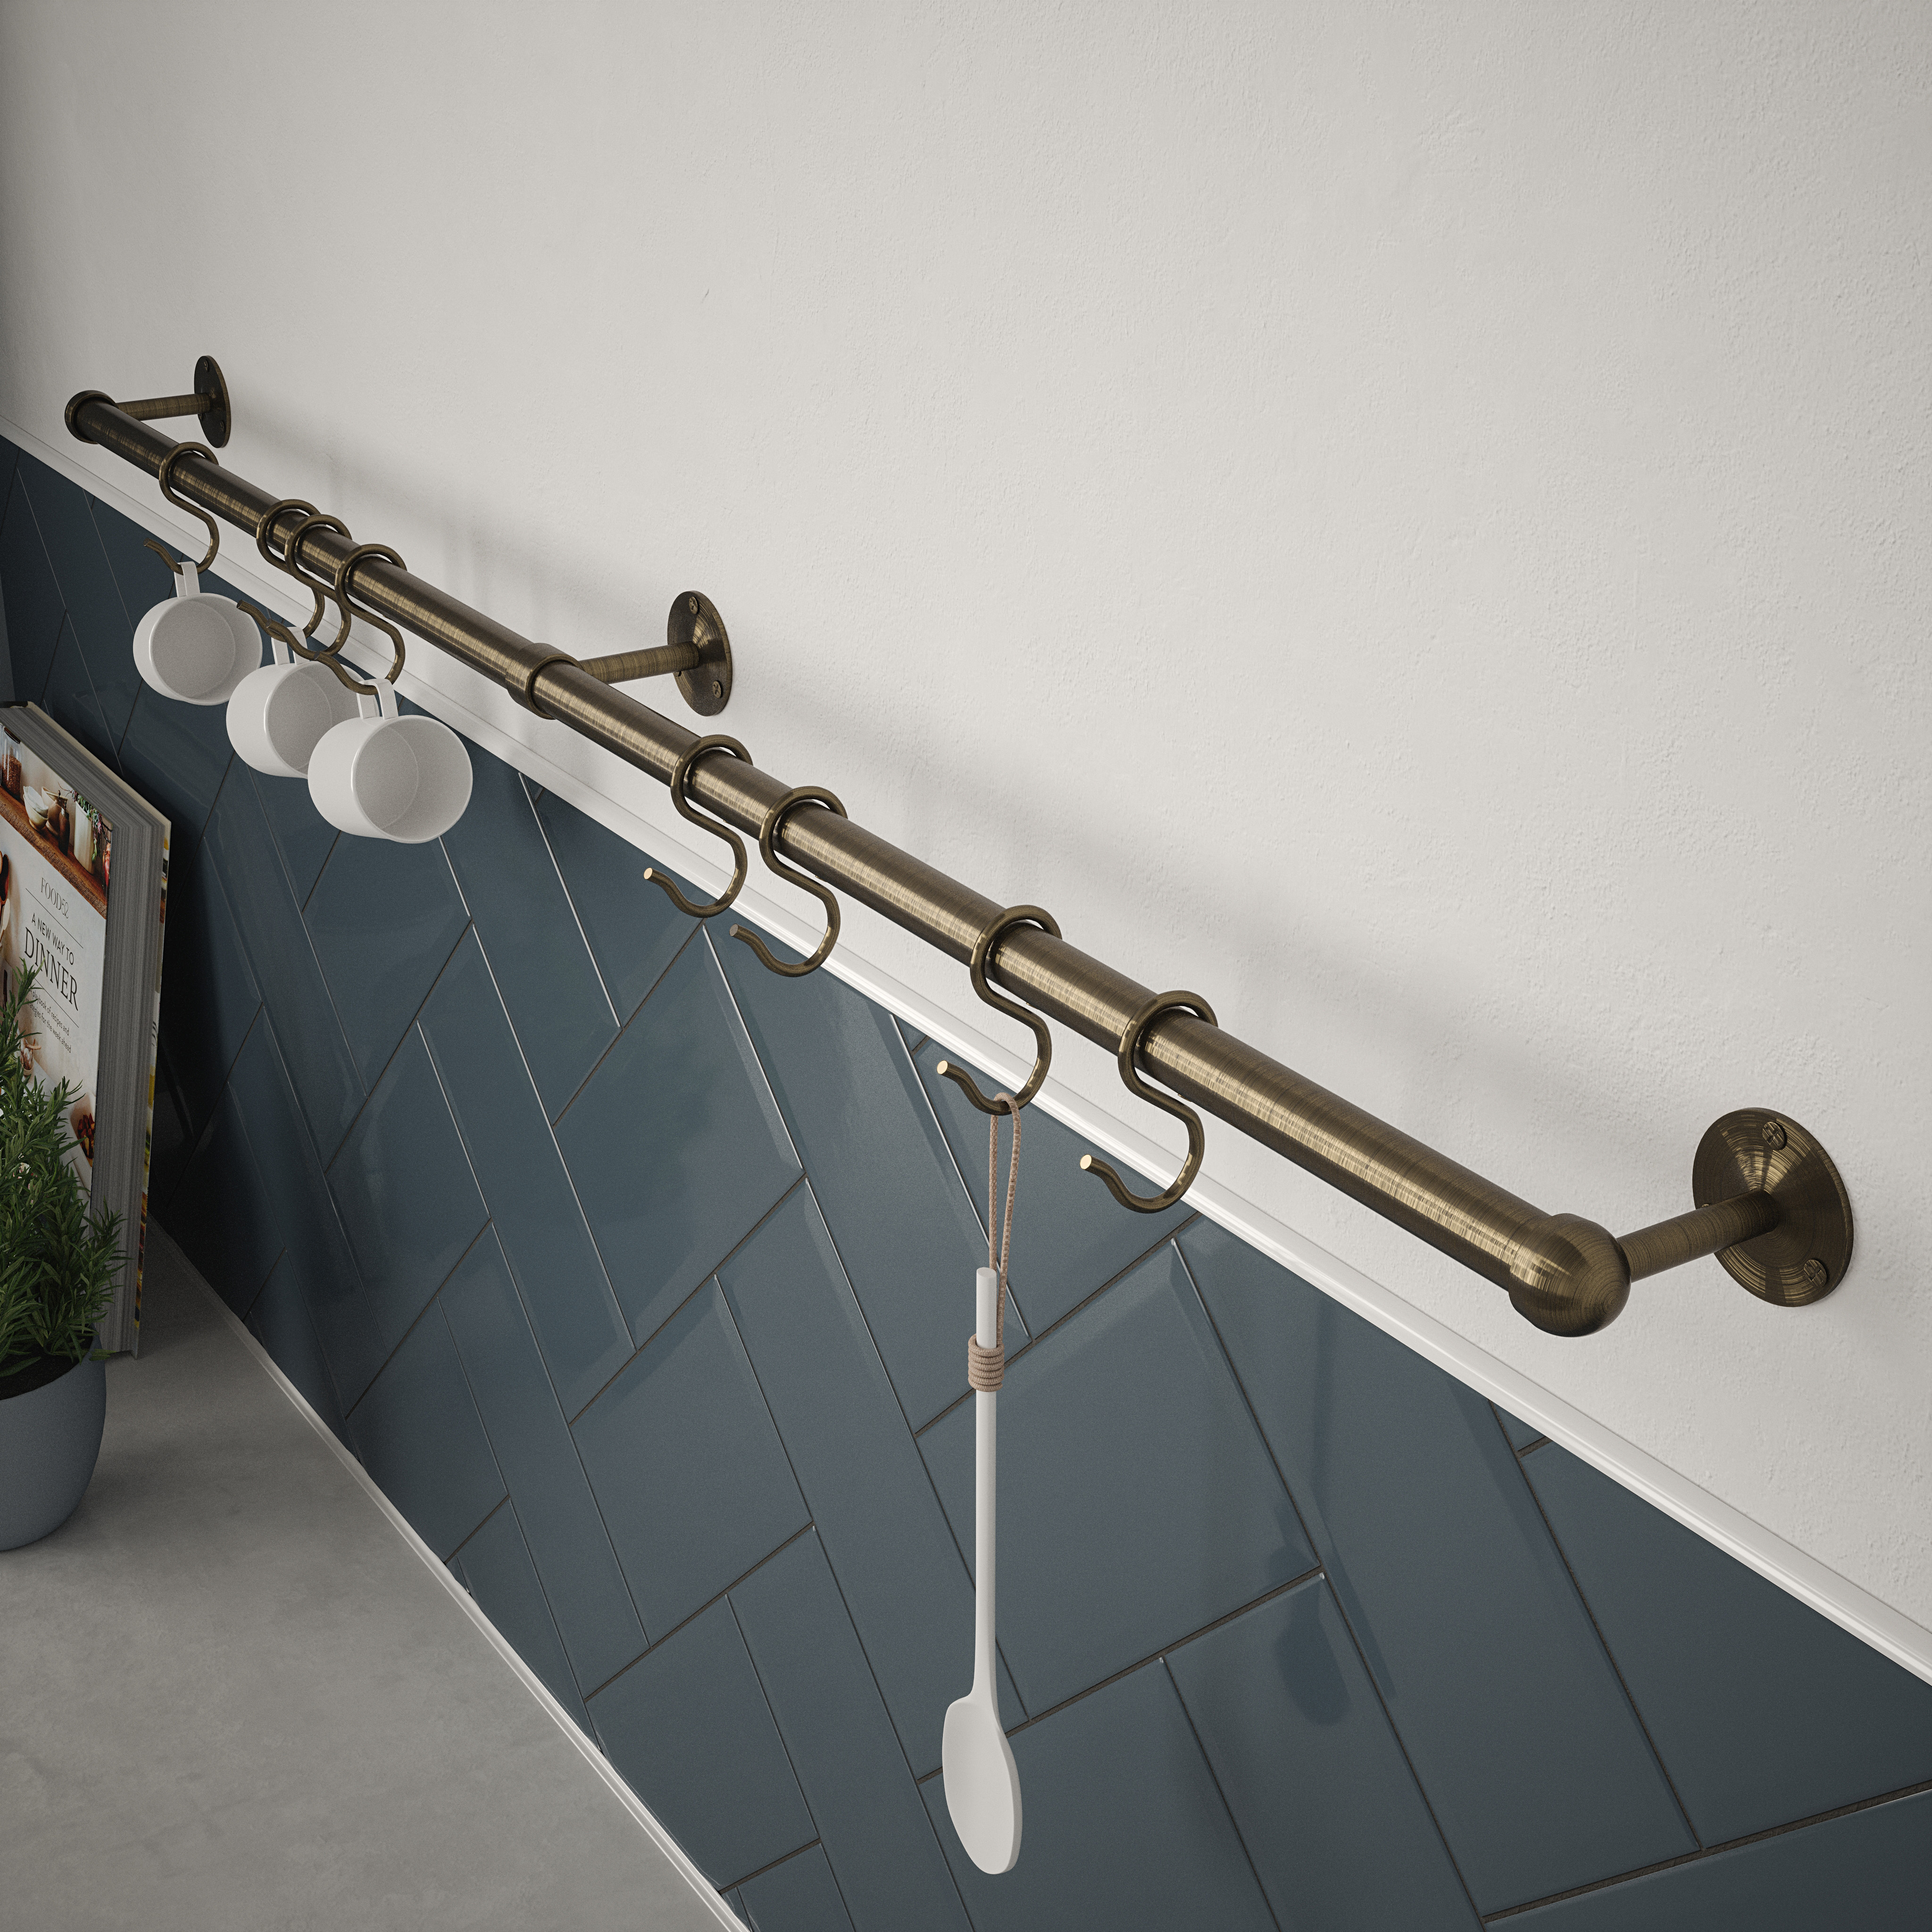 Image of Rothley Utensil Rail Kit, in Antique Copper and Brass, Stainless Steel, Size: 19x1000mm